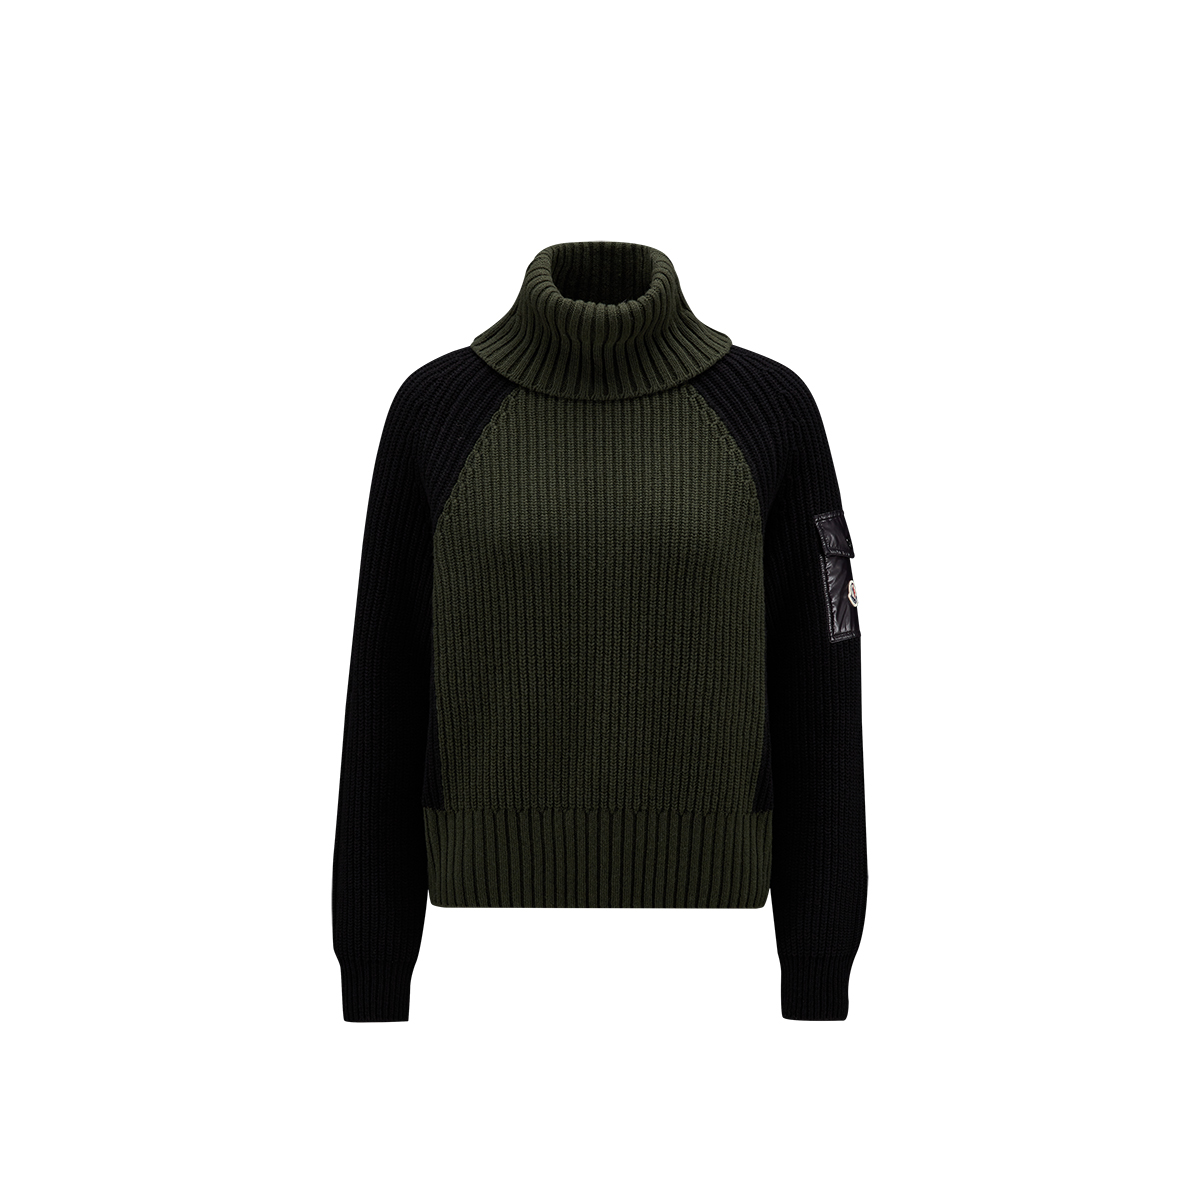 A black and green turtle neck jumper